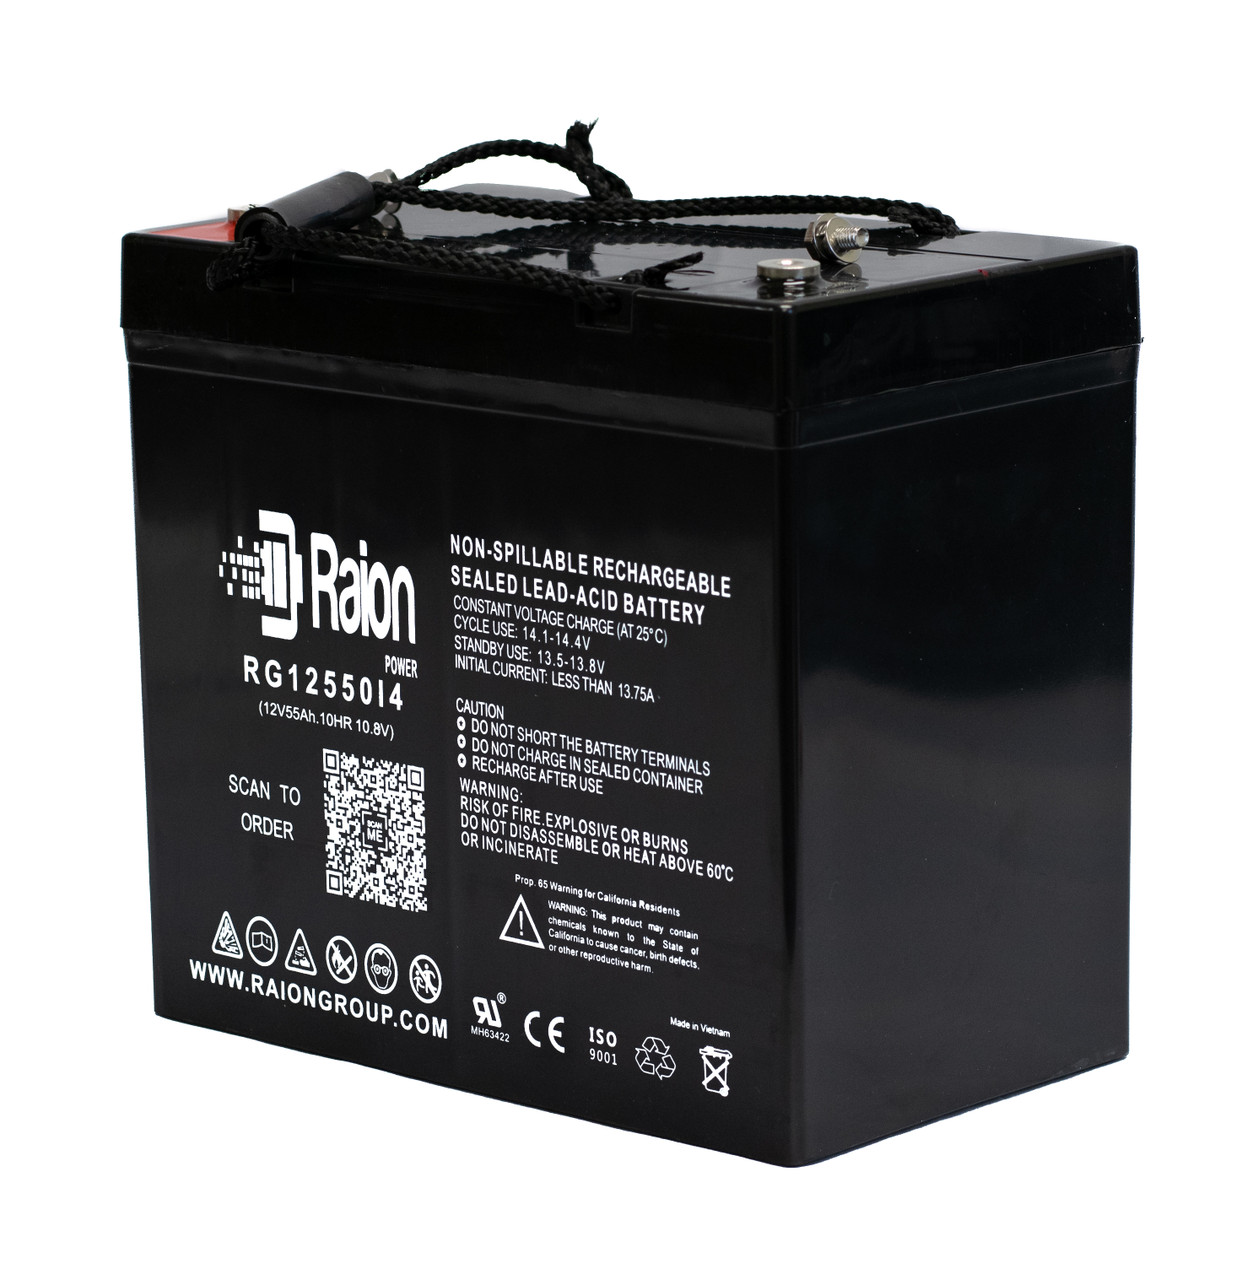 Raion Power 12V 55Ah 22NF Mobility Scooter Battery Replacement for Adaptive Driving Systems Model 14